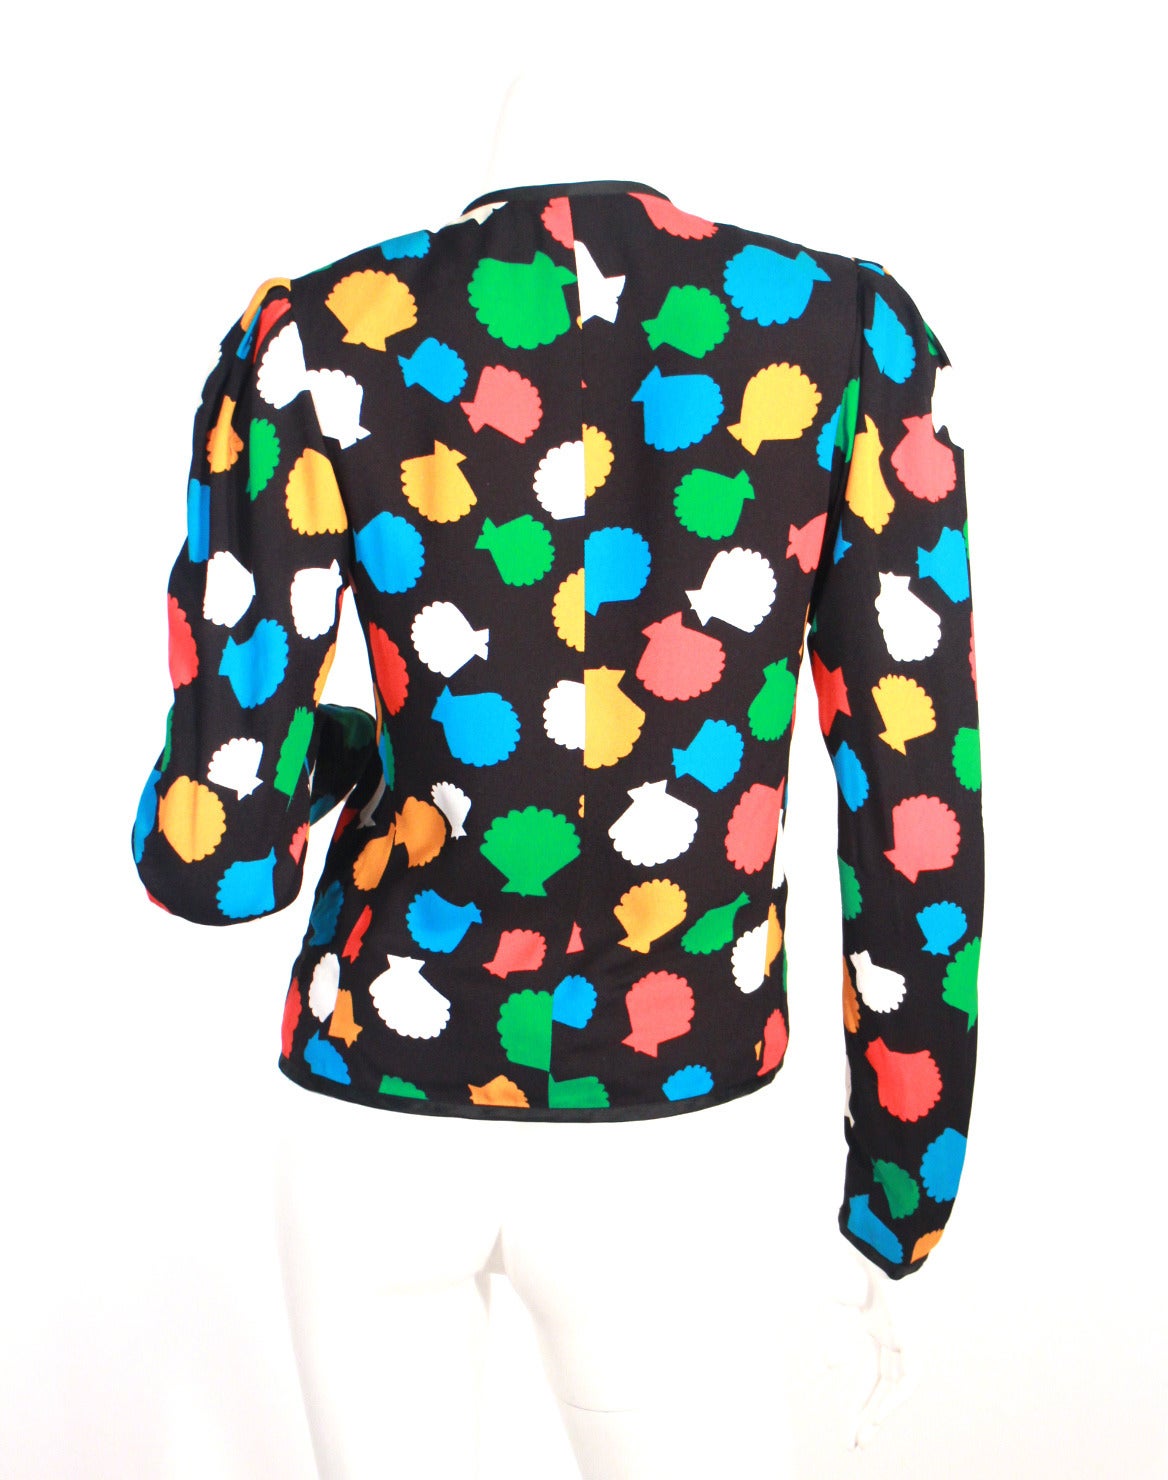 1980's Yves Saint Laurent sea shell print jacket/blouse. Can be worn as a blouse or open as a little summer jacket. Colorful fun print, lined, shoulder pads, black buttons up the front. 

Size 36, true to size
Full Length 23in
Arm Length 25in